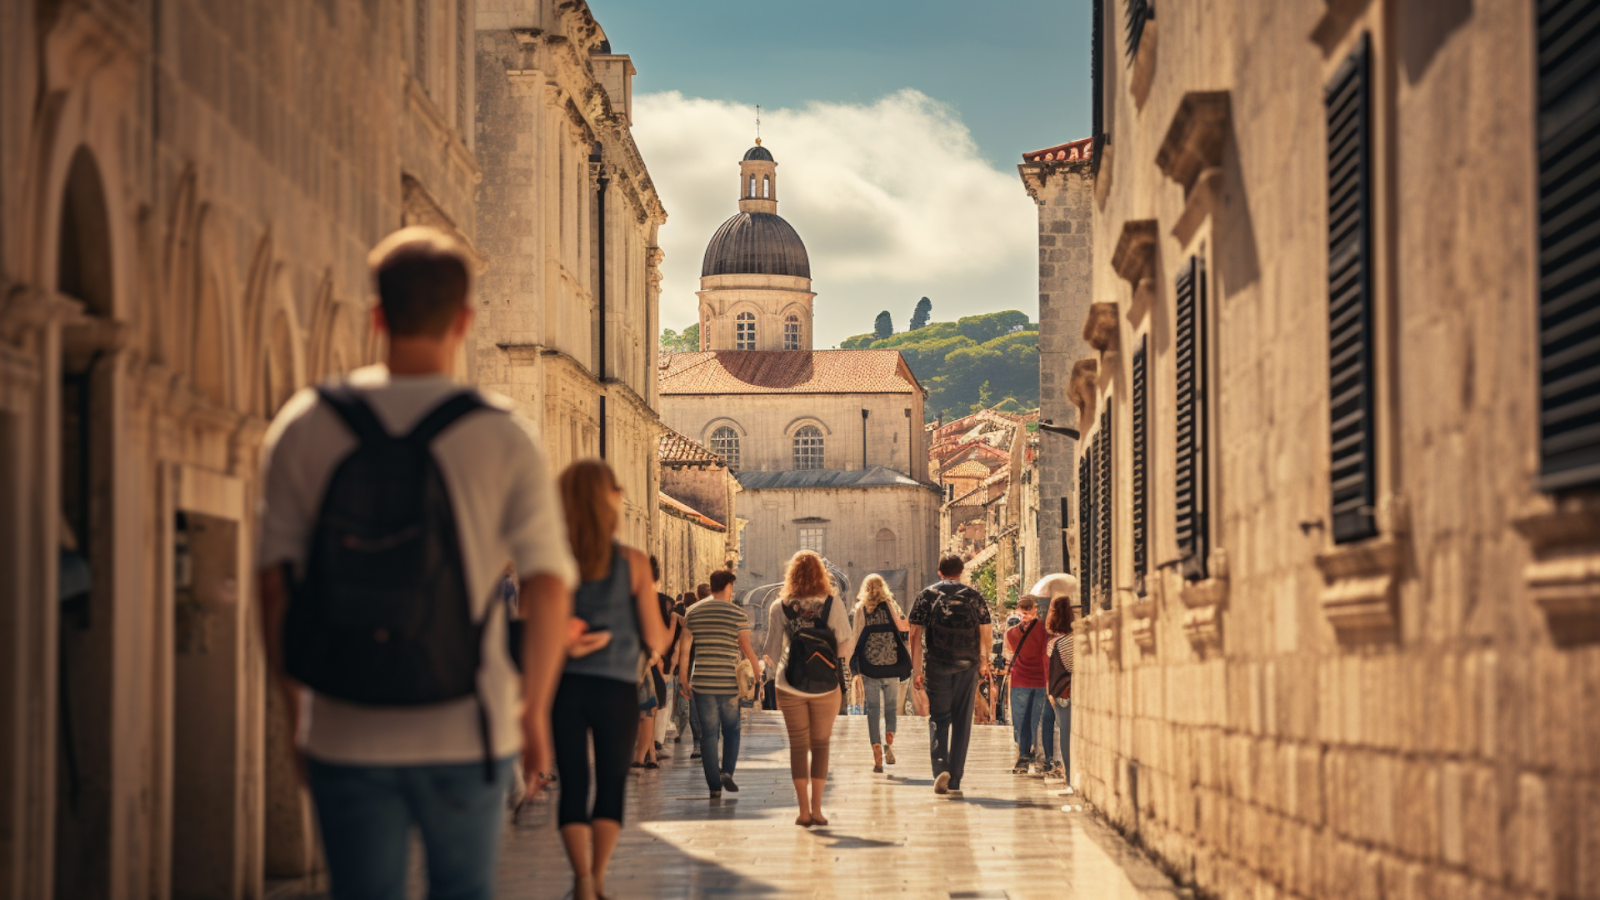 Tourists stroll down a sunlit street in Dubrovnik, with the city's famed historic cathedral rising in the background, encapsulating the essence of Croatia's historical cities.